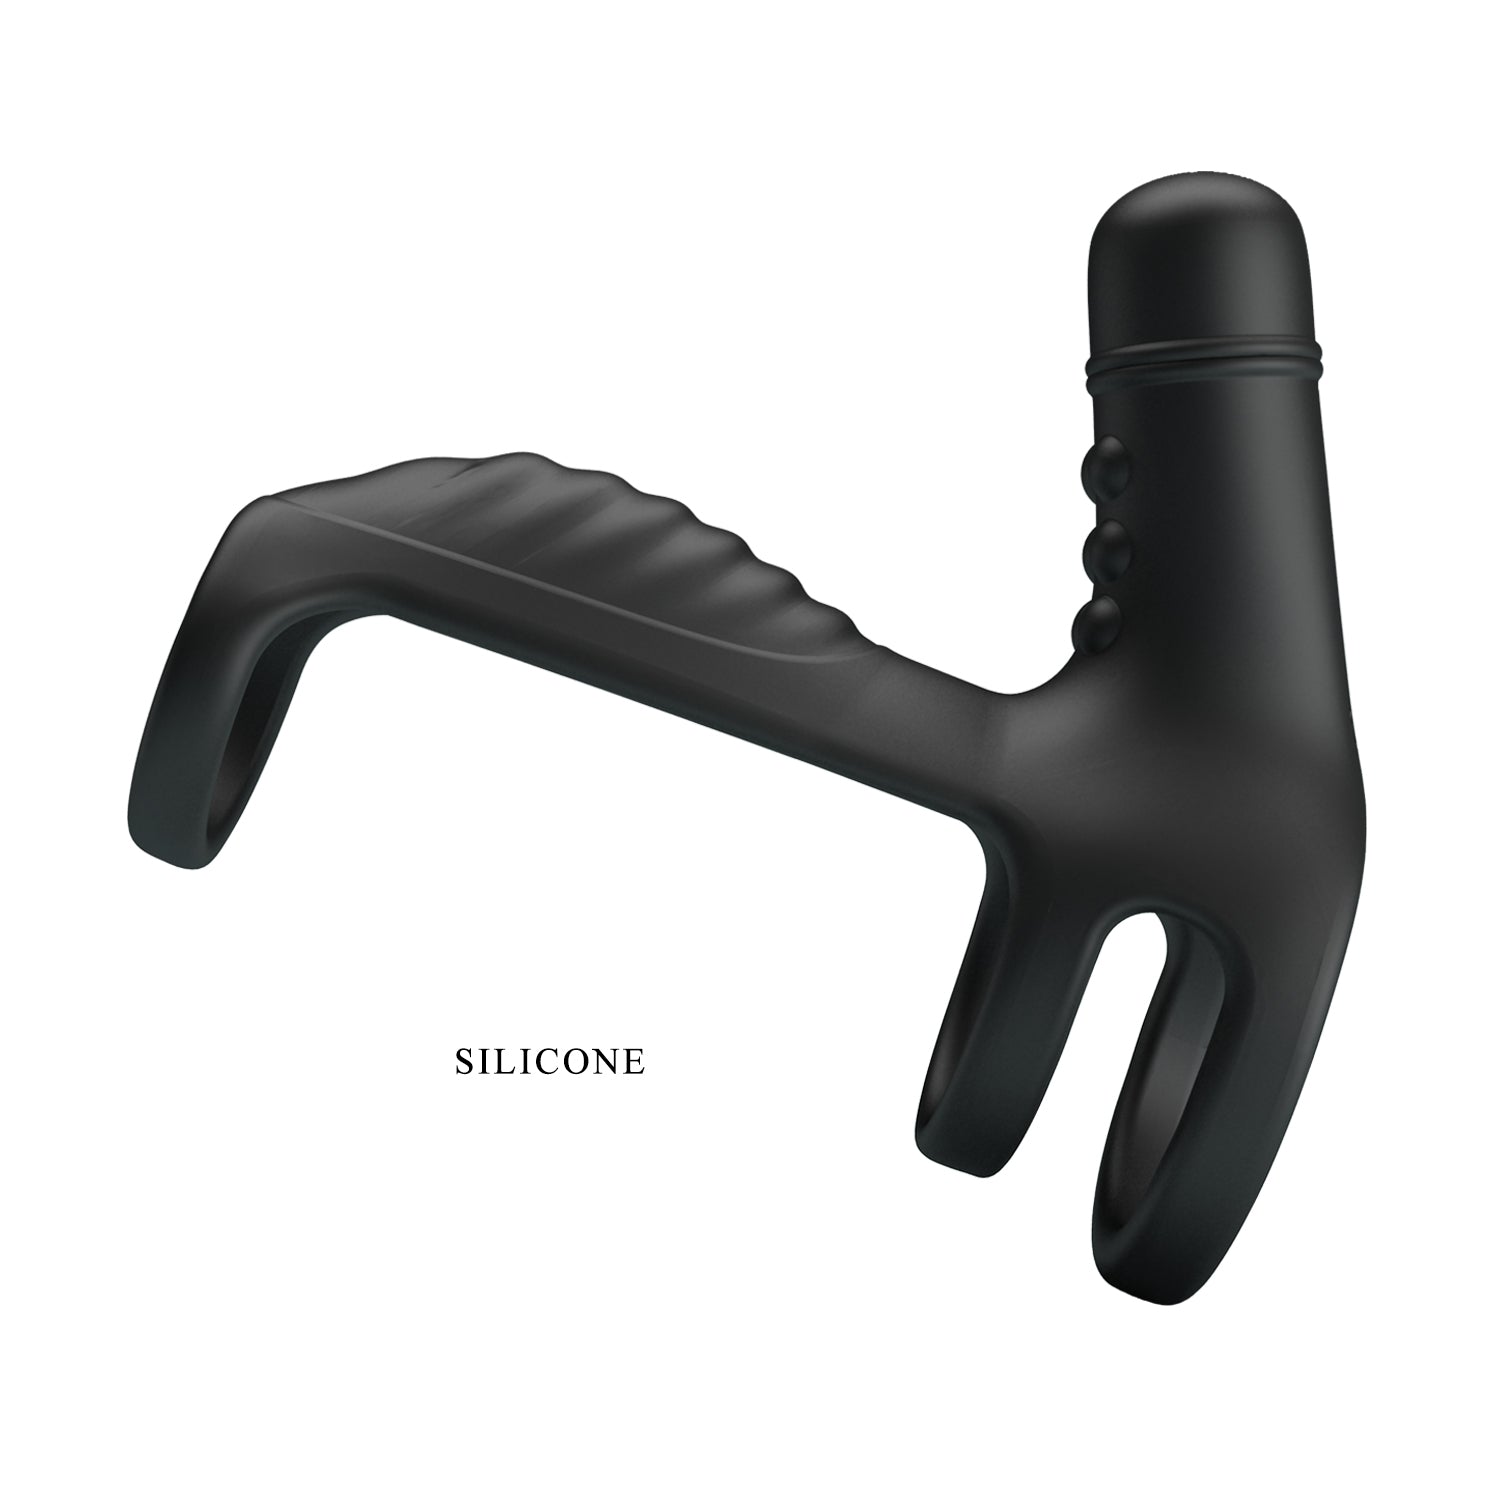 Prettylove Silicone Penis Sleeve Vibrating Cock Ring